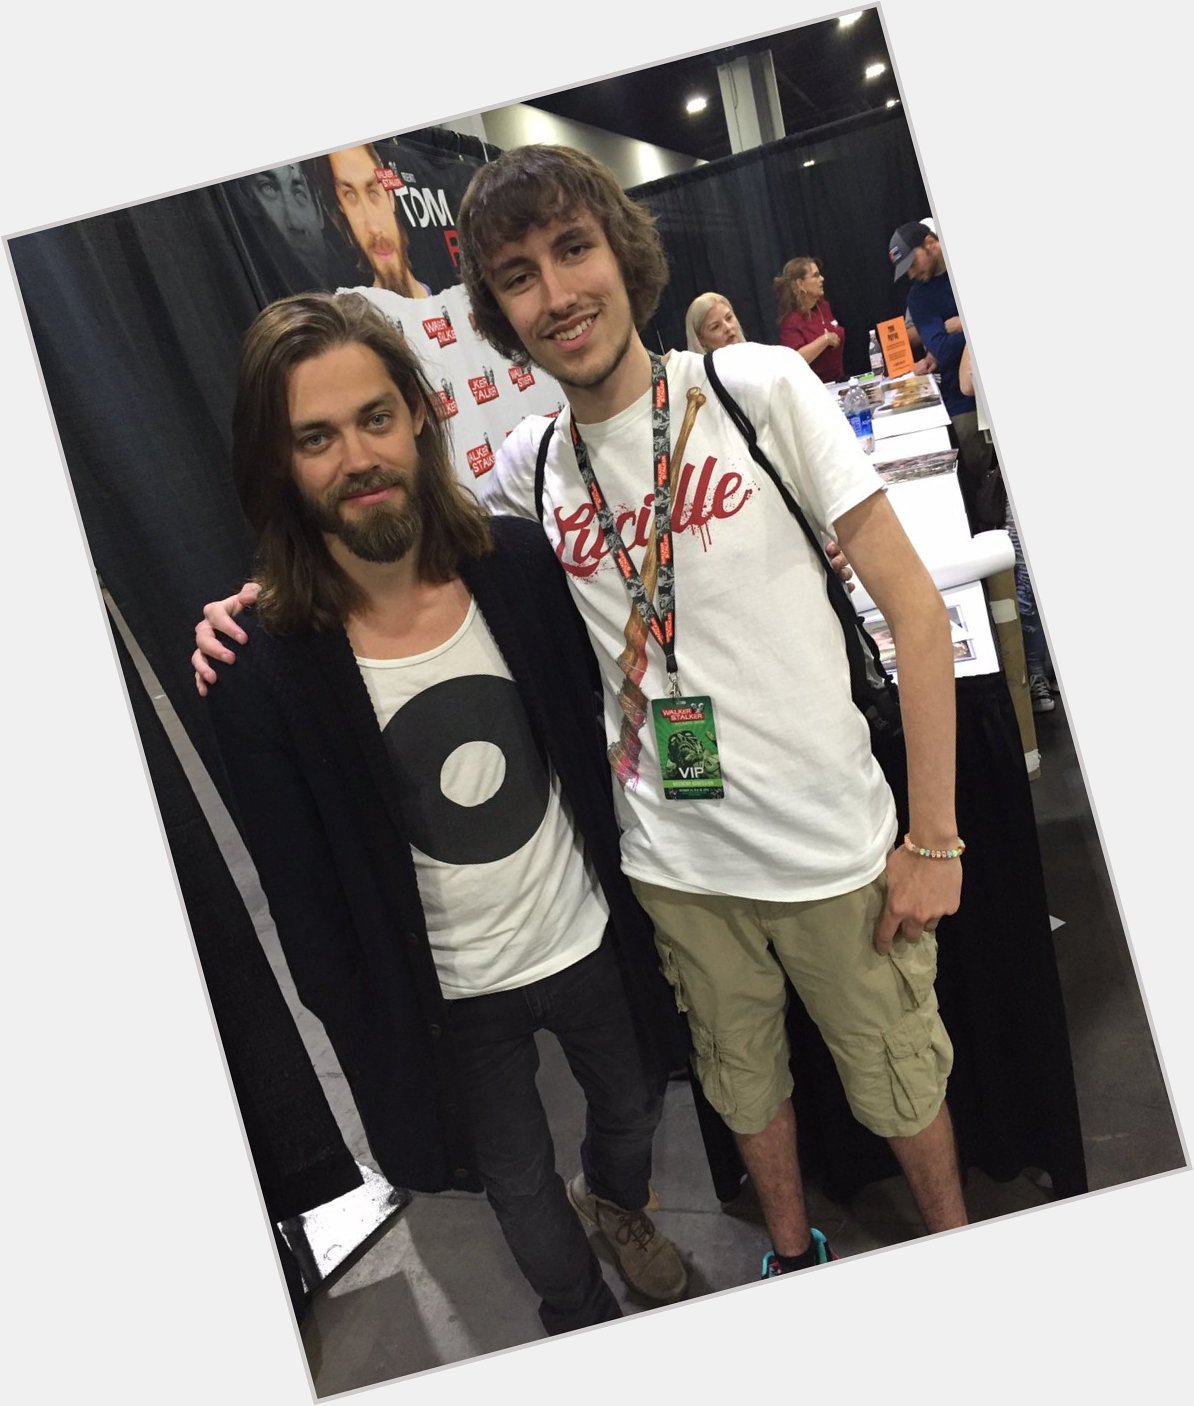 Happy Birthday to Tom Payne! I hope it s a great one and hope to meet you again one day!    